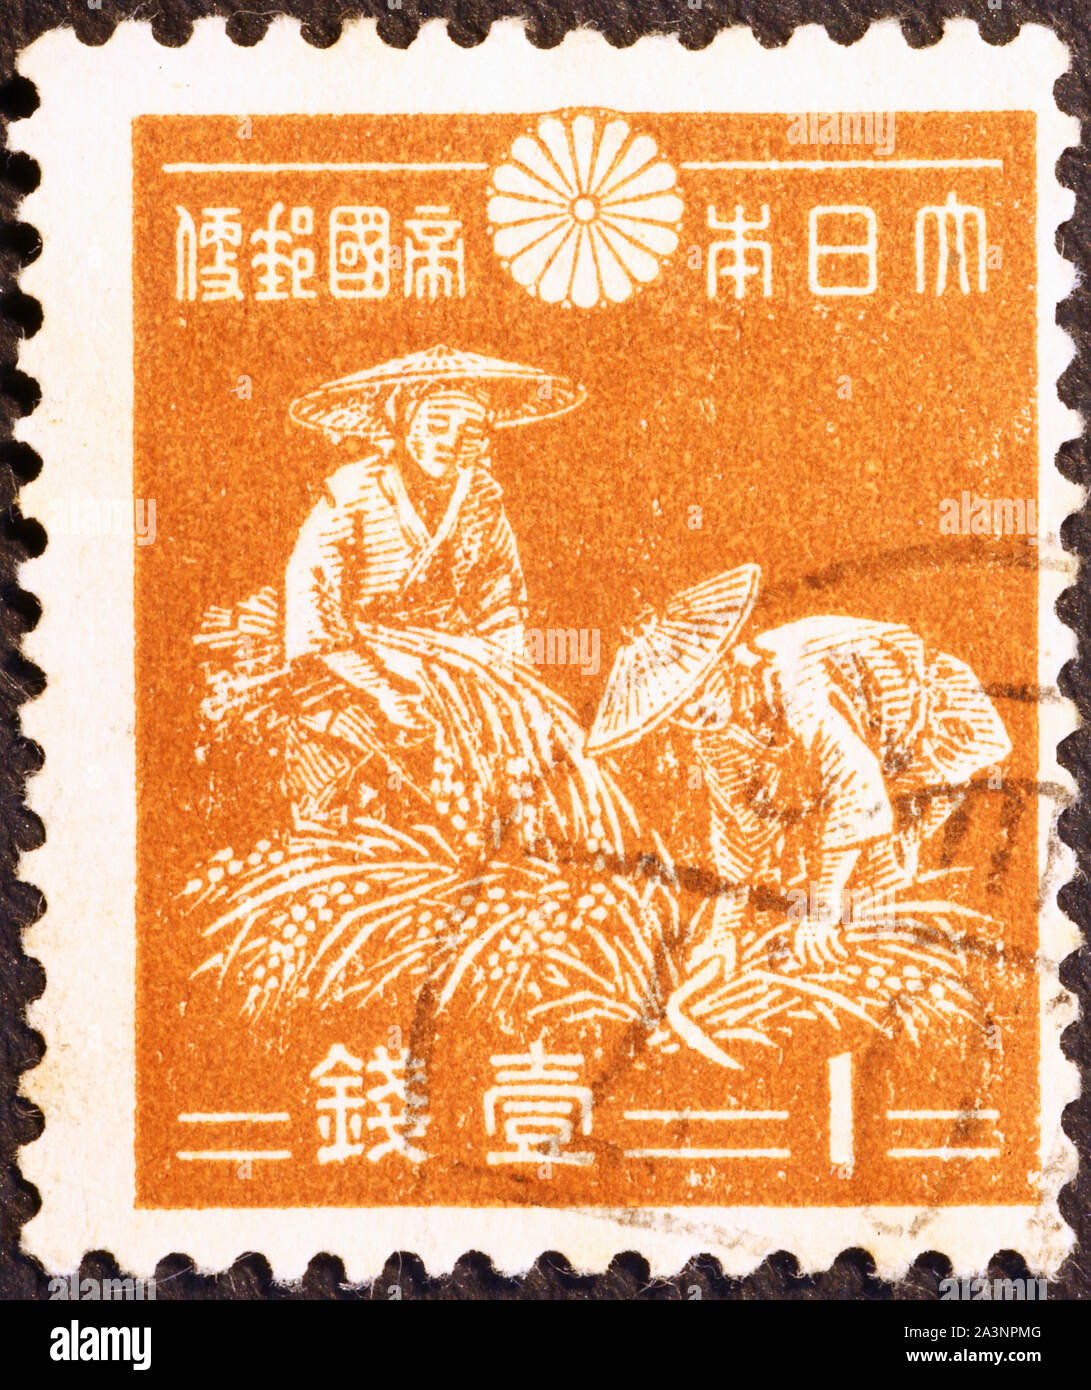 Two women harvesting rice on old japanese postage stamp Stock Photo